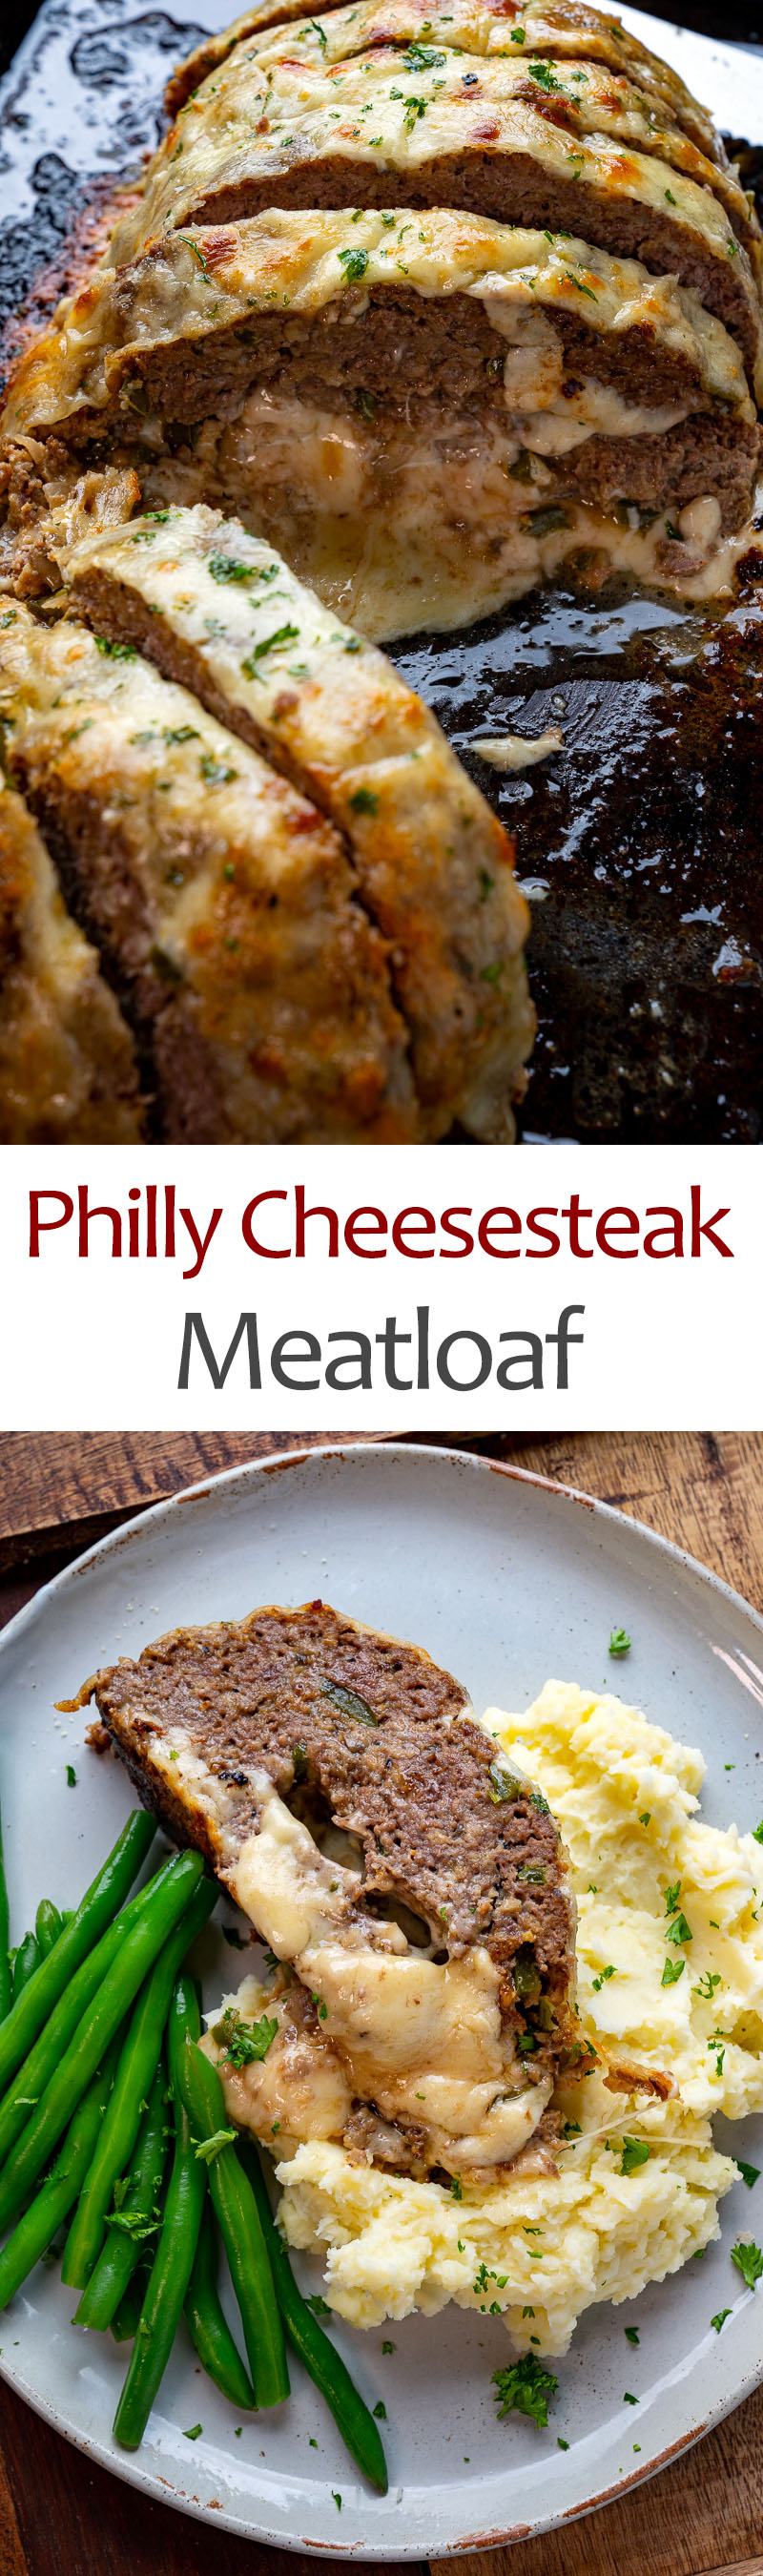 Philly Cheesesteak Meatloaf Closet Cooking